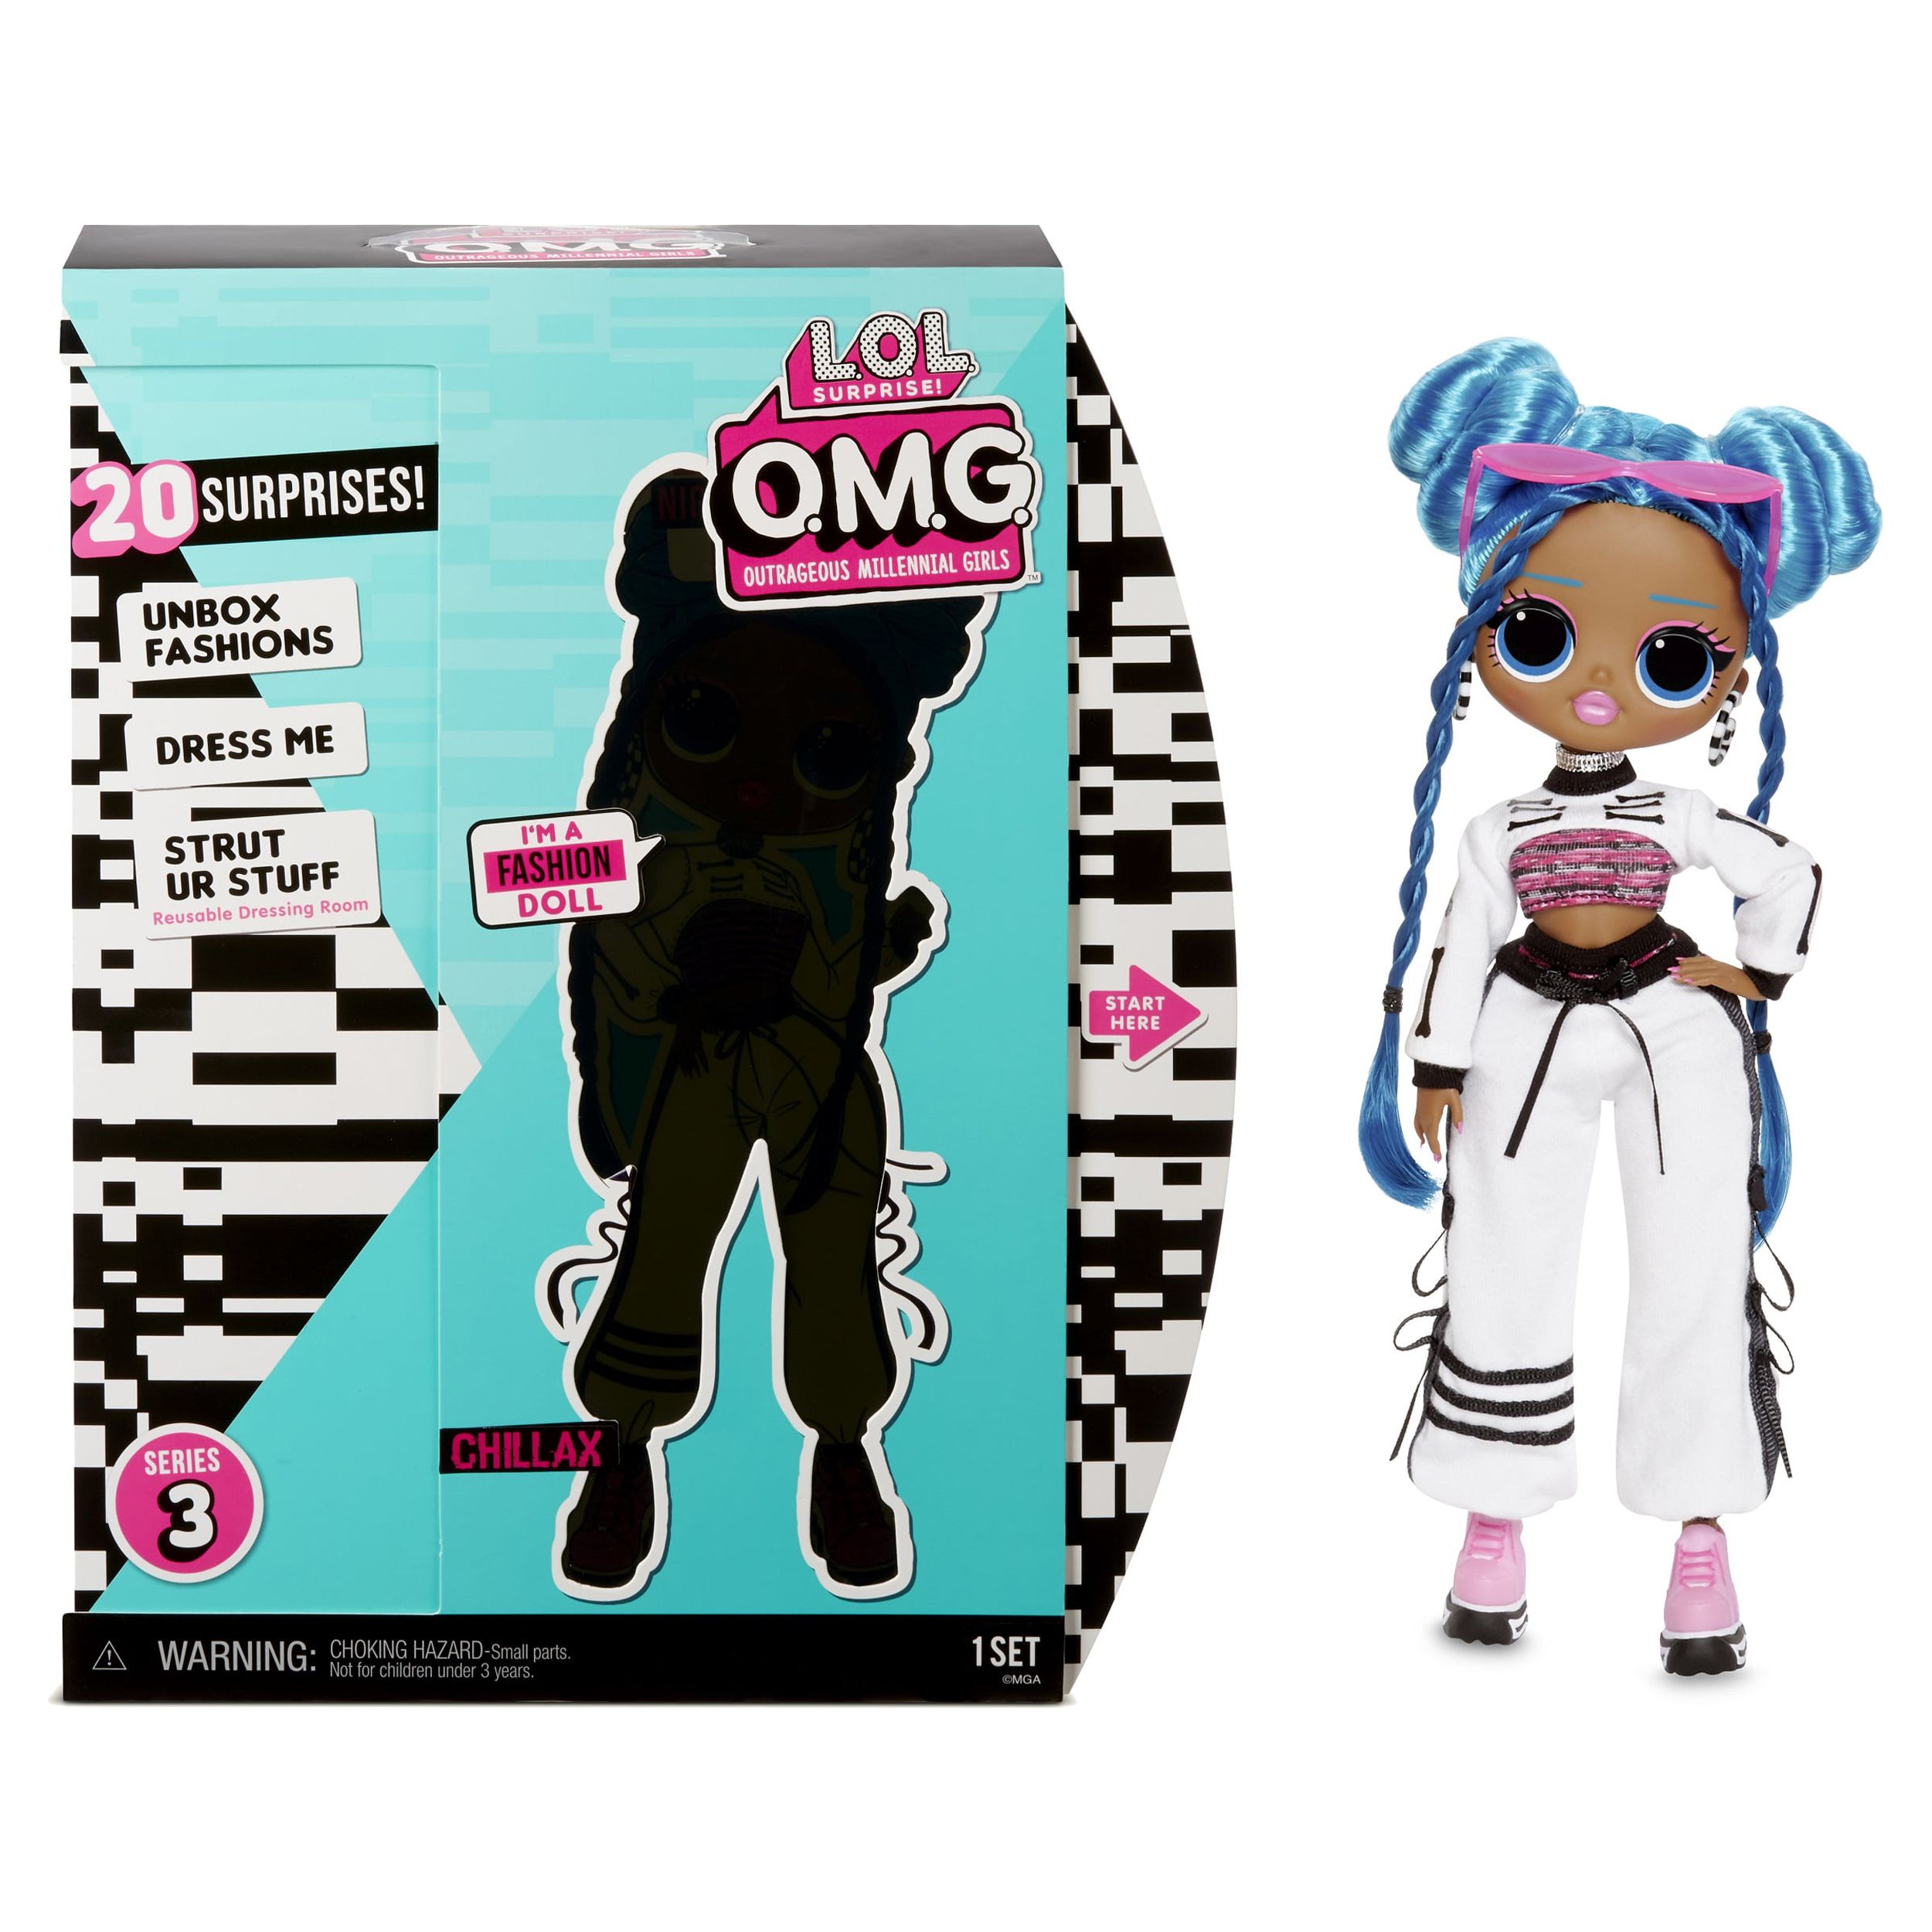 LOL Surprise OMG Series 3 Chillax Fashion Doll With 20 Surprises, Great Gift for Kids Ages 4 5 6+ - image 1 of 7